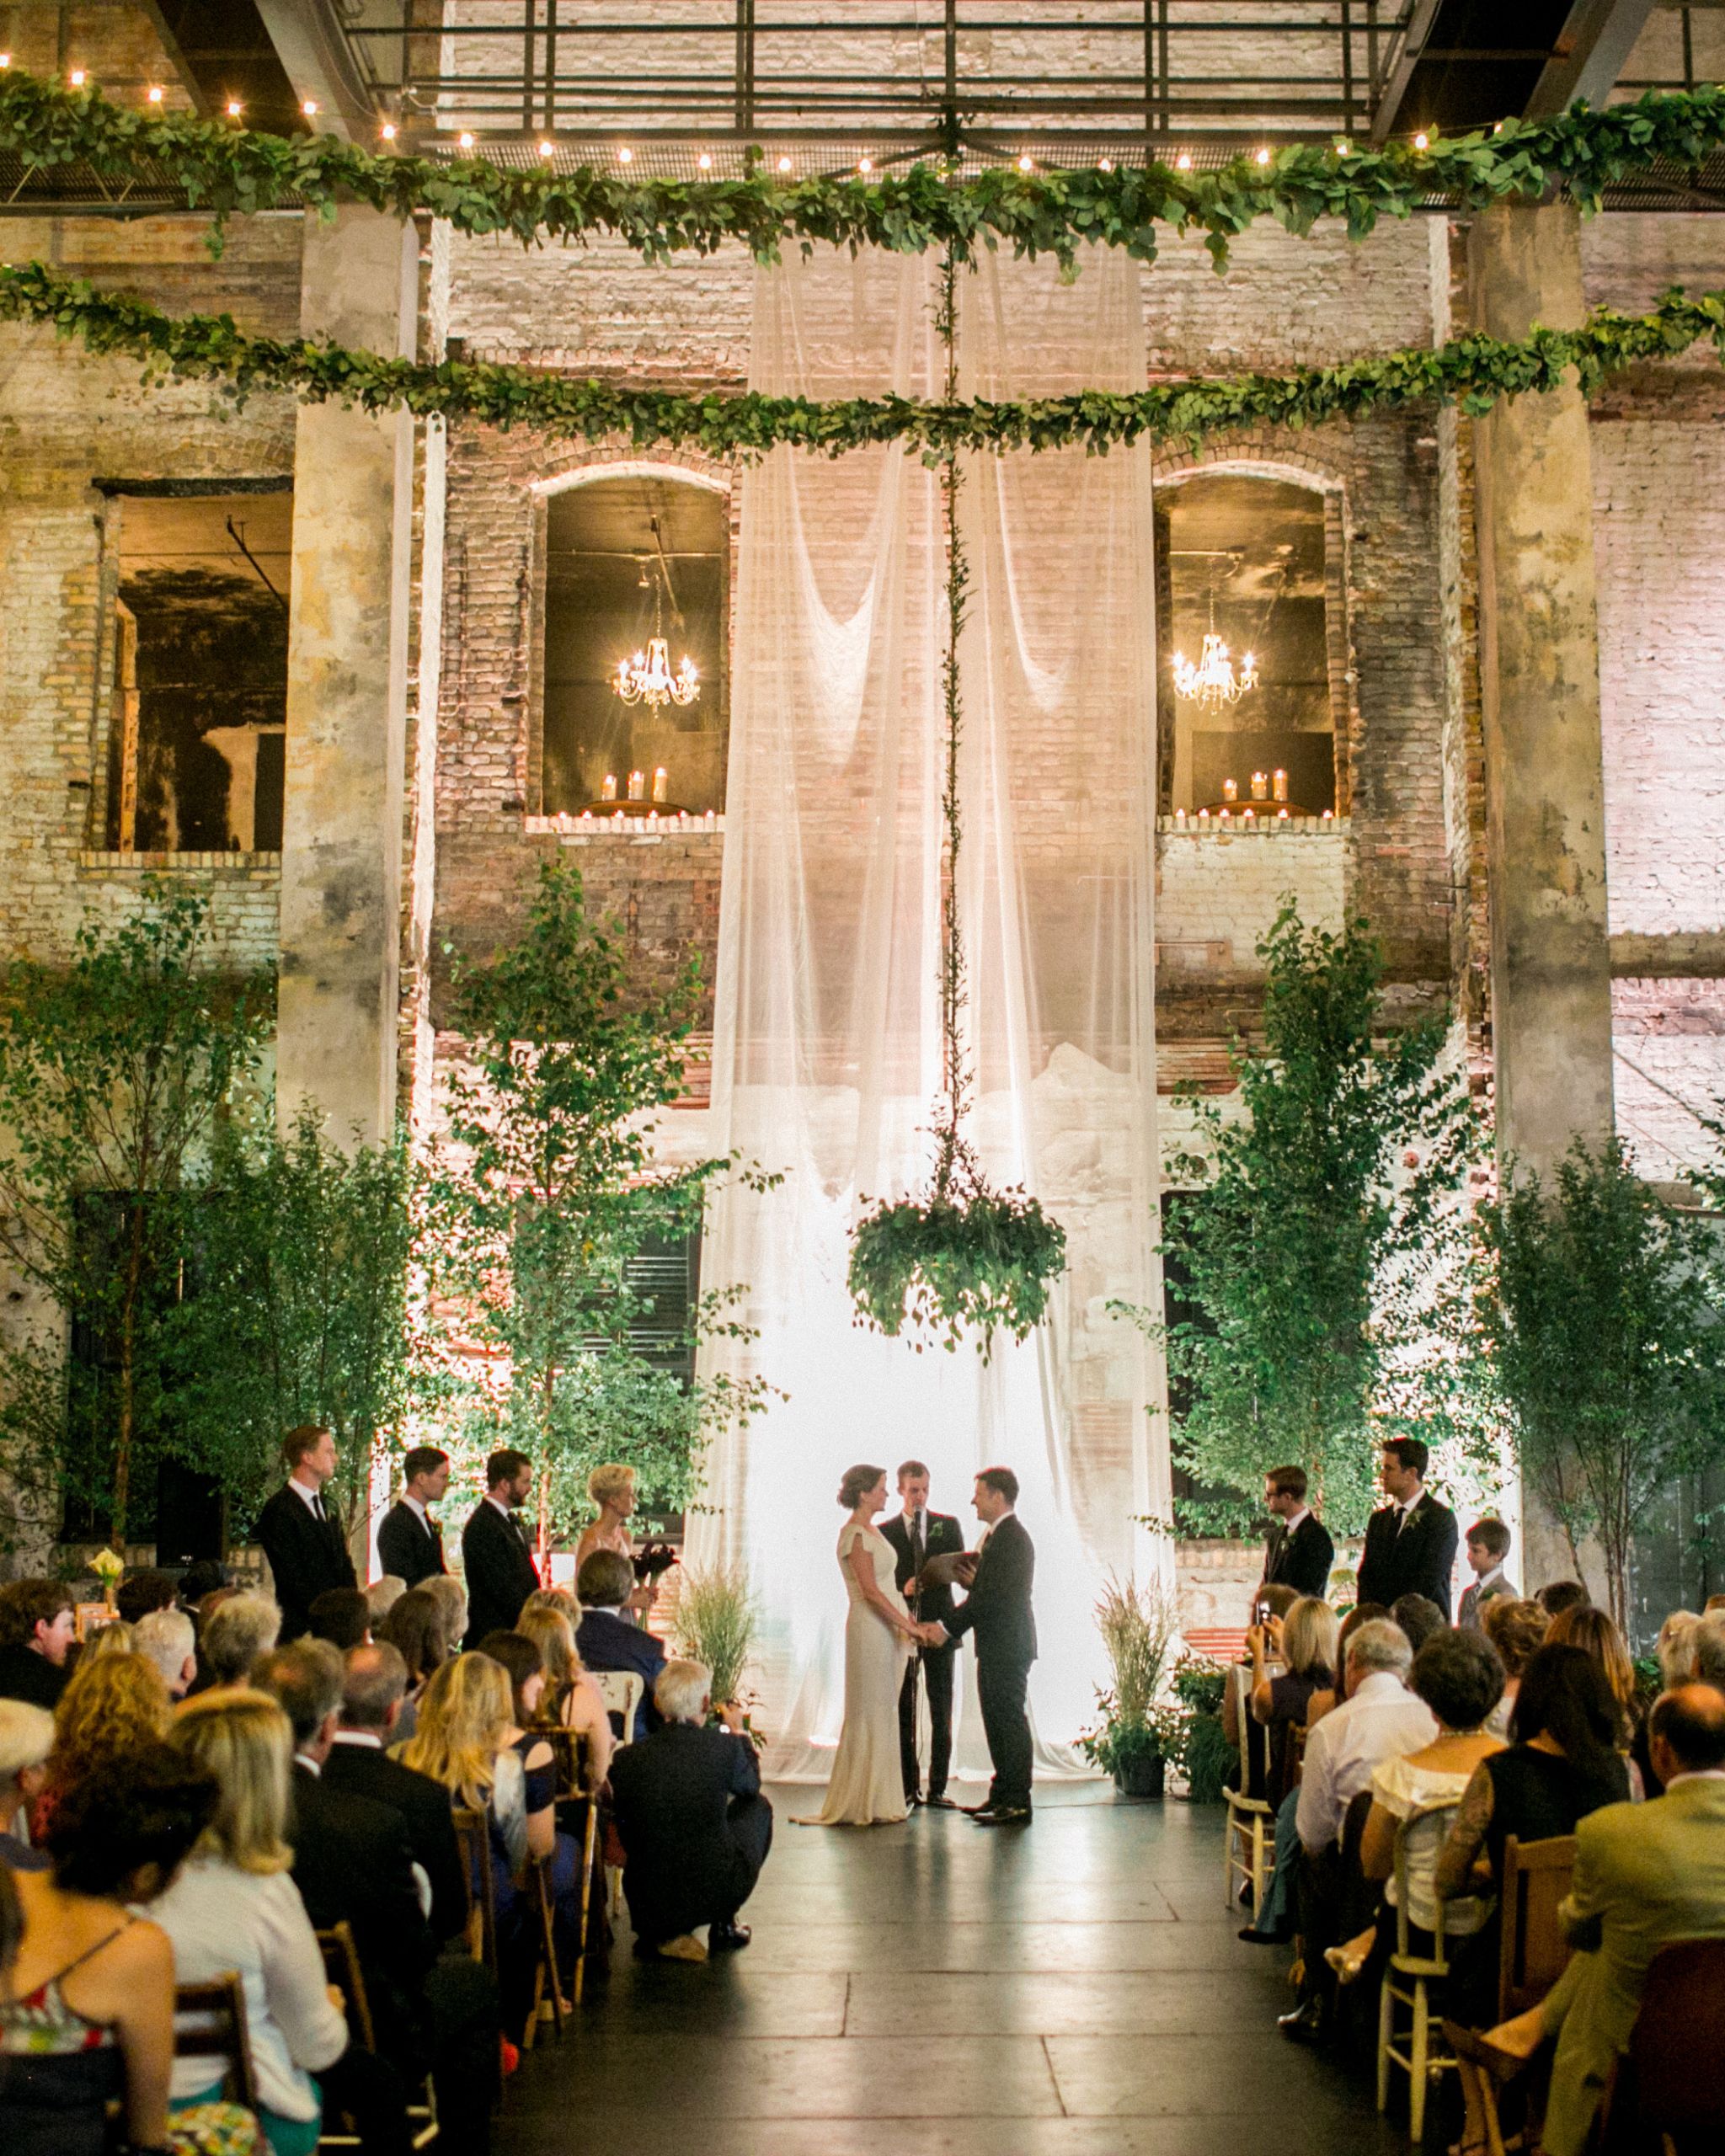 Wedding Venues In California
 Restored Warehouses Where You Can Tie the Knot